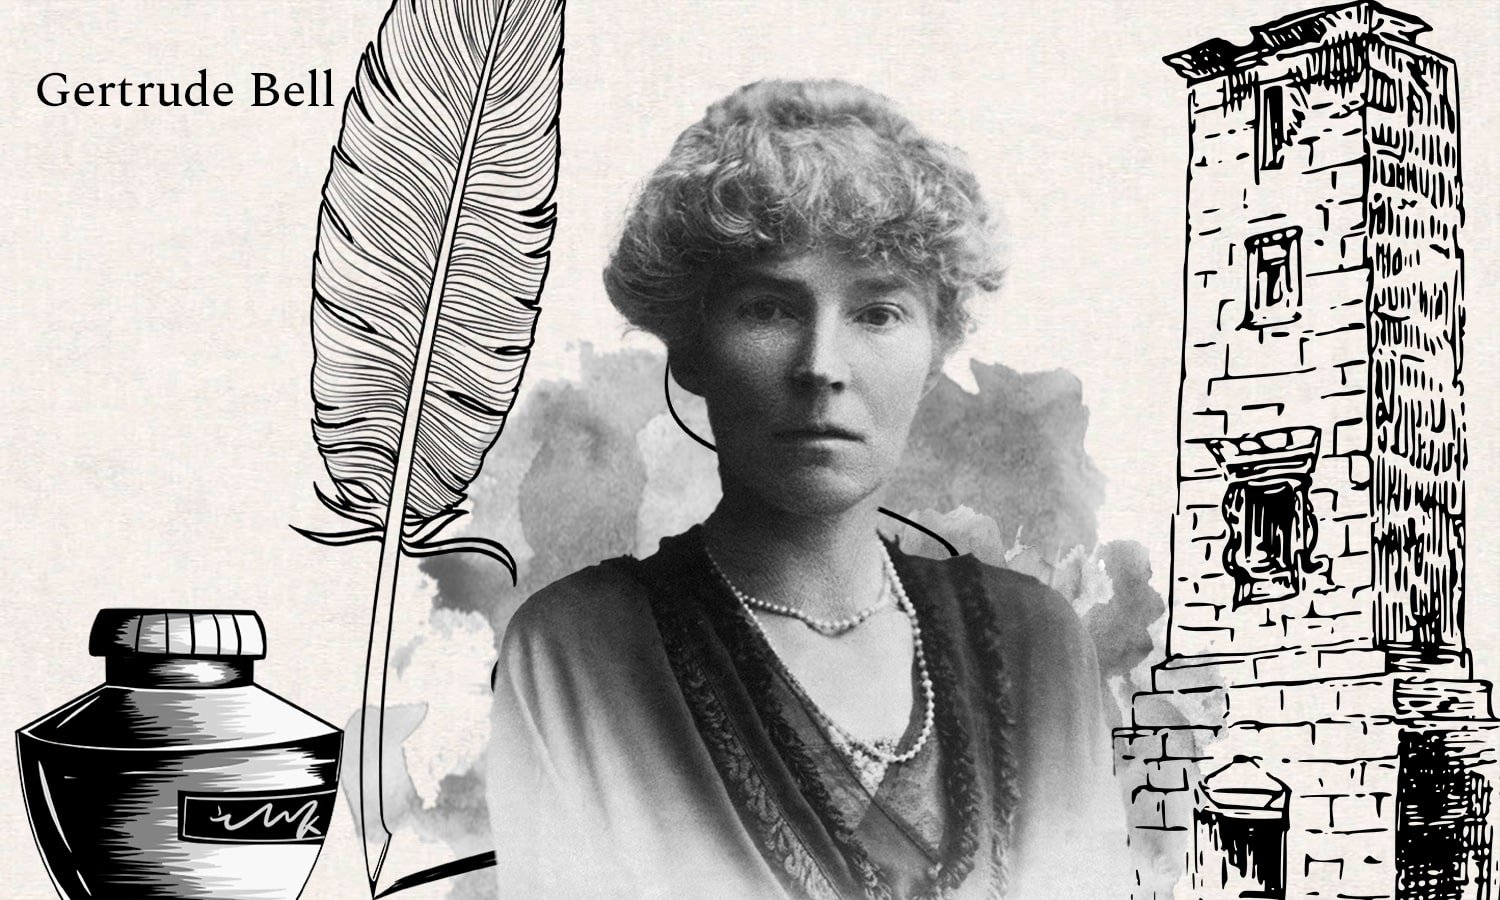 The illustration shows Gertrude Bell. (Getty Images Photo / Edited by Betül Tilmaç)